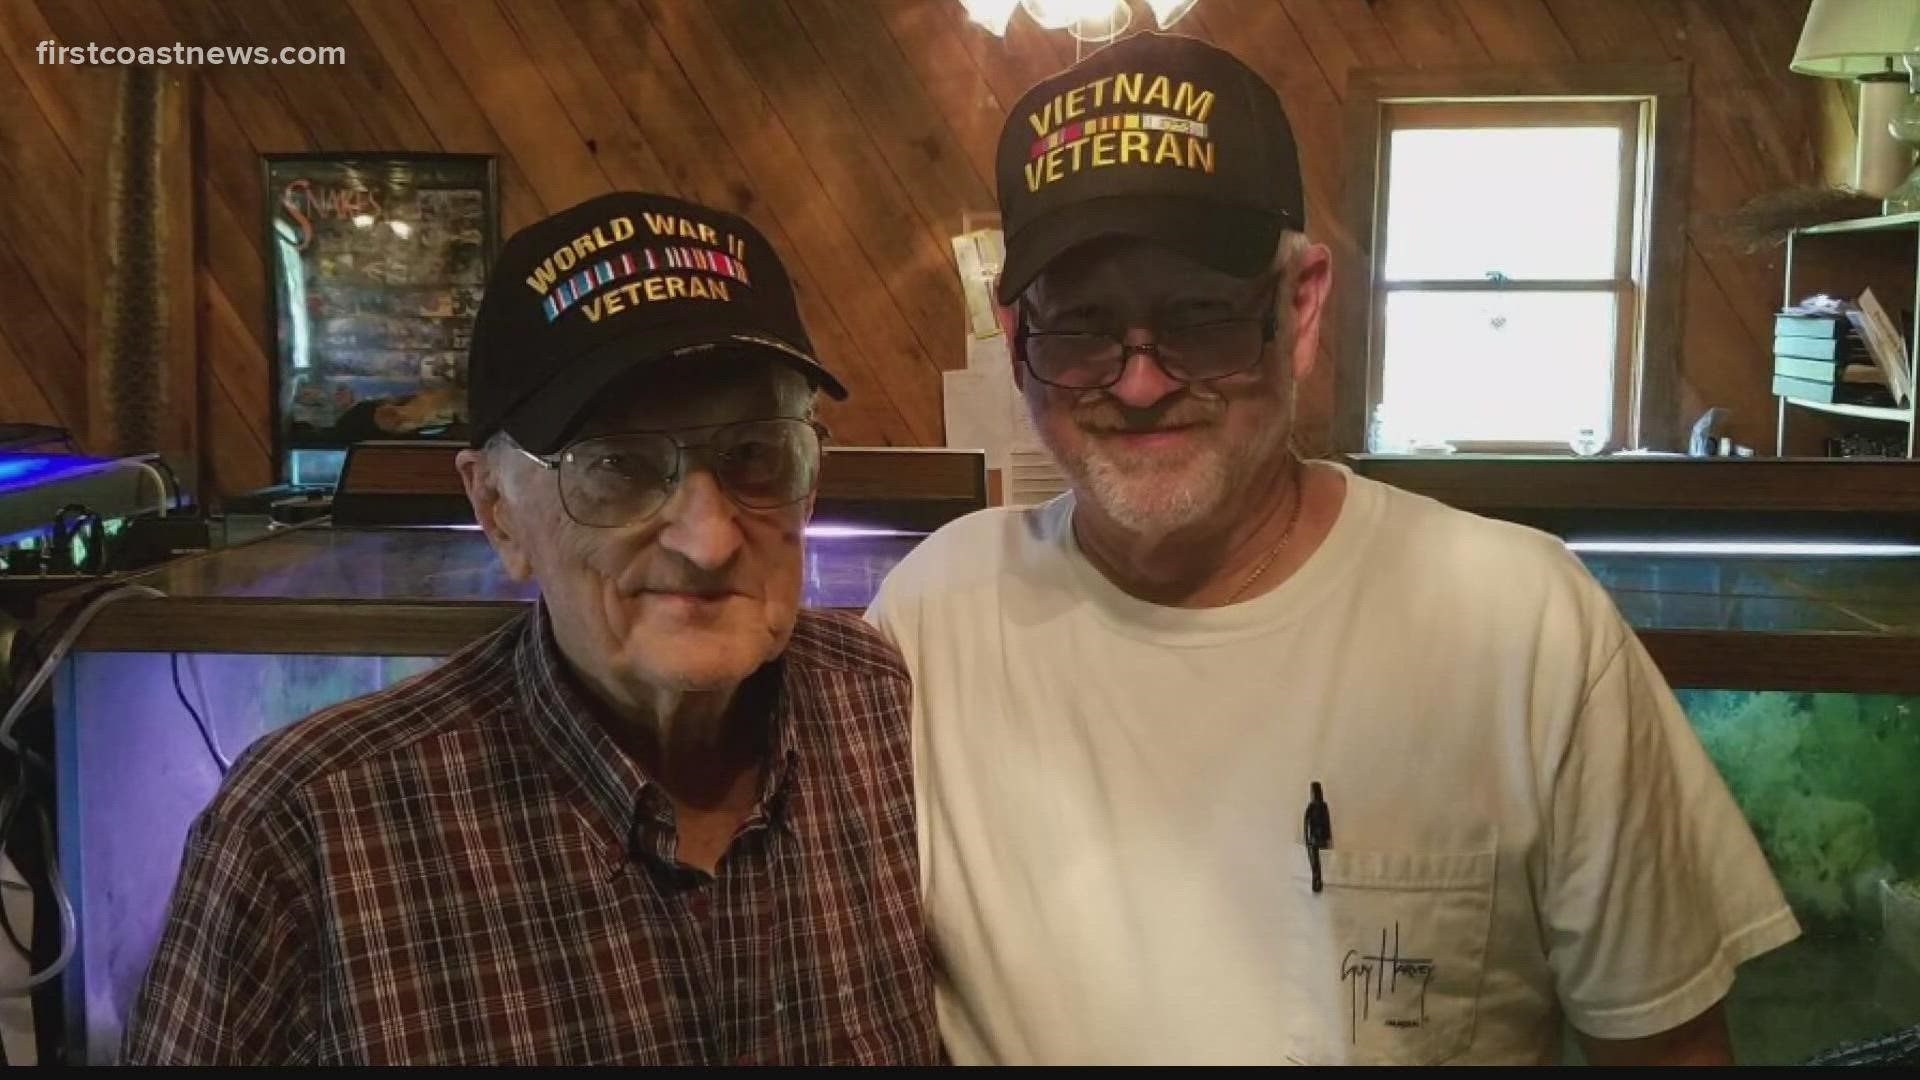 Paul Sternett tells First Coast News, his father Harold, served in the 100th Army infantry division and celebrated his birthday on July 16th.